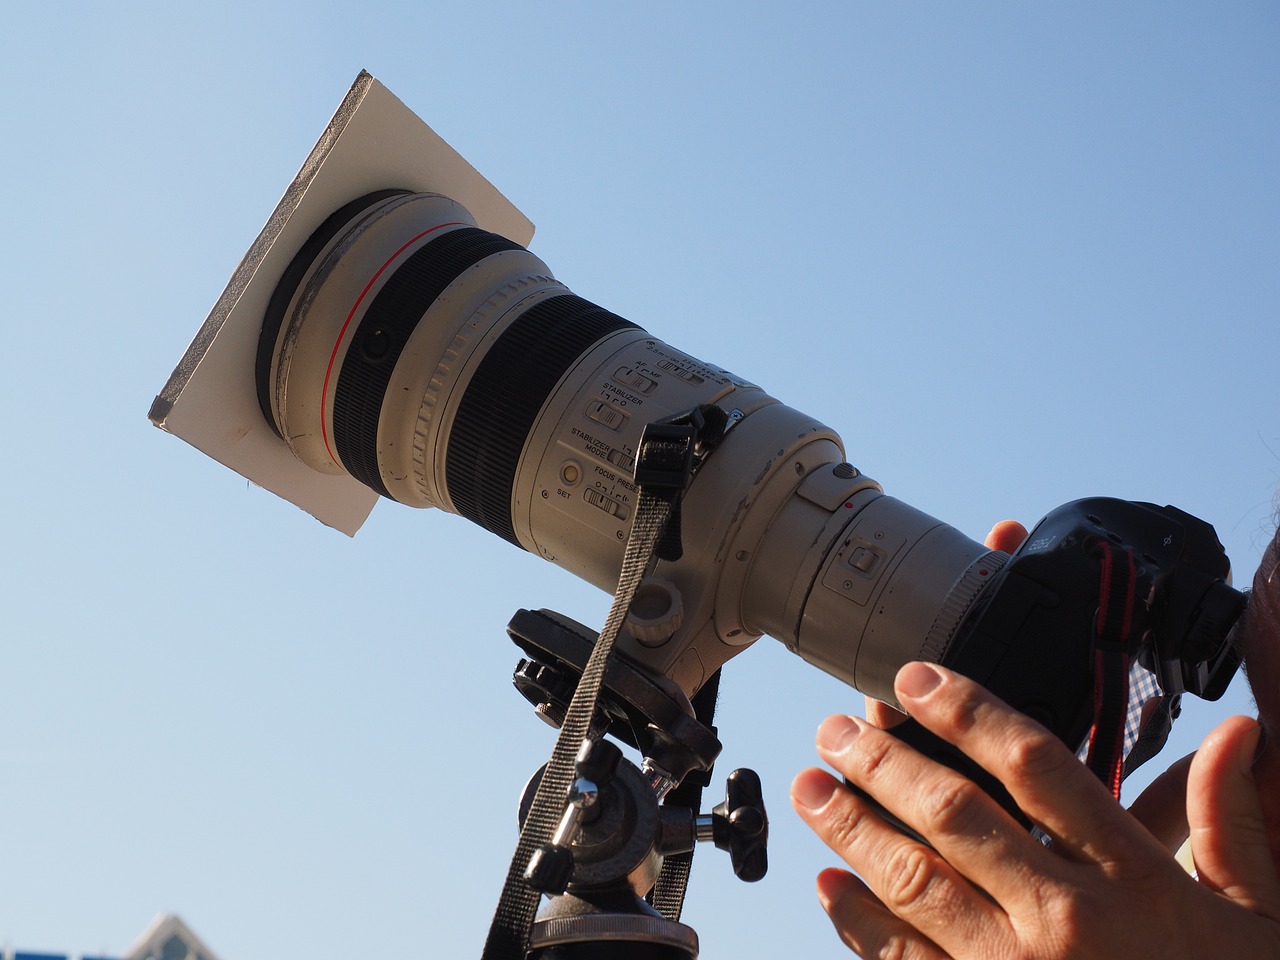 a close up of a person holding a camera, photorealism, 3 0 0 mm telephoto lens, towering over the camera, natural light canon eos c 3 0 0, behind the scenes photography